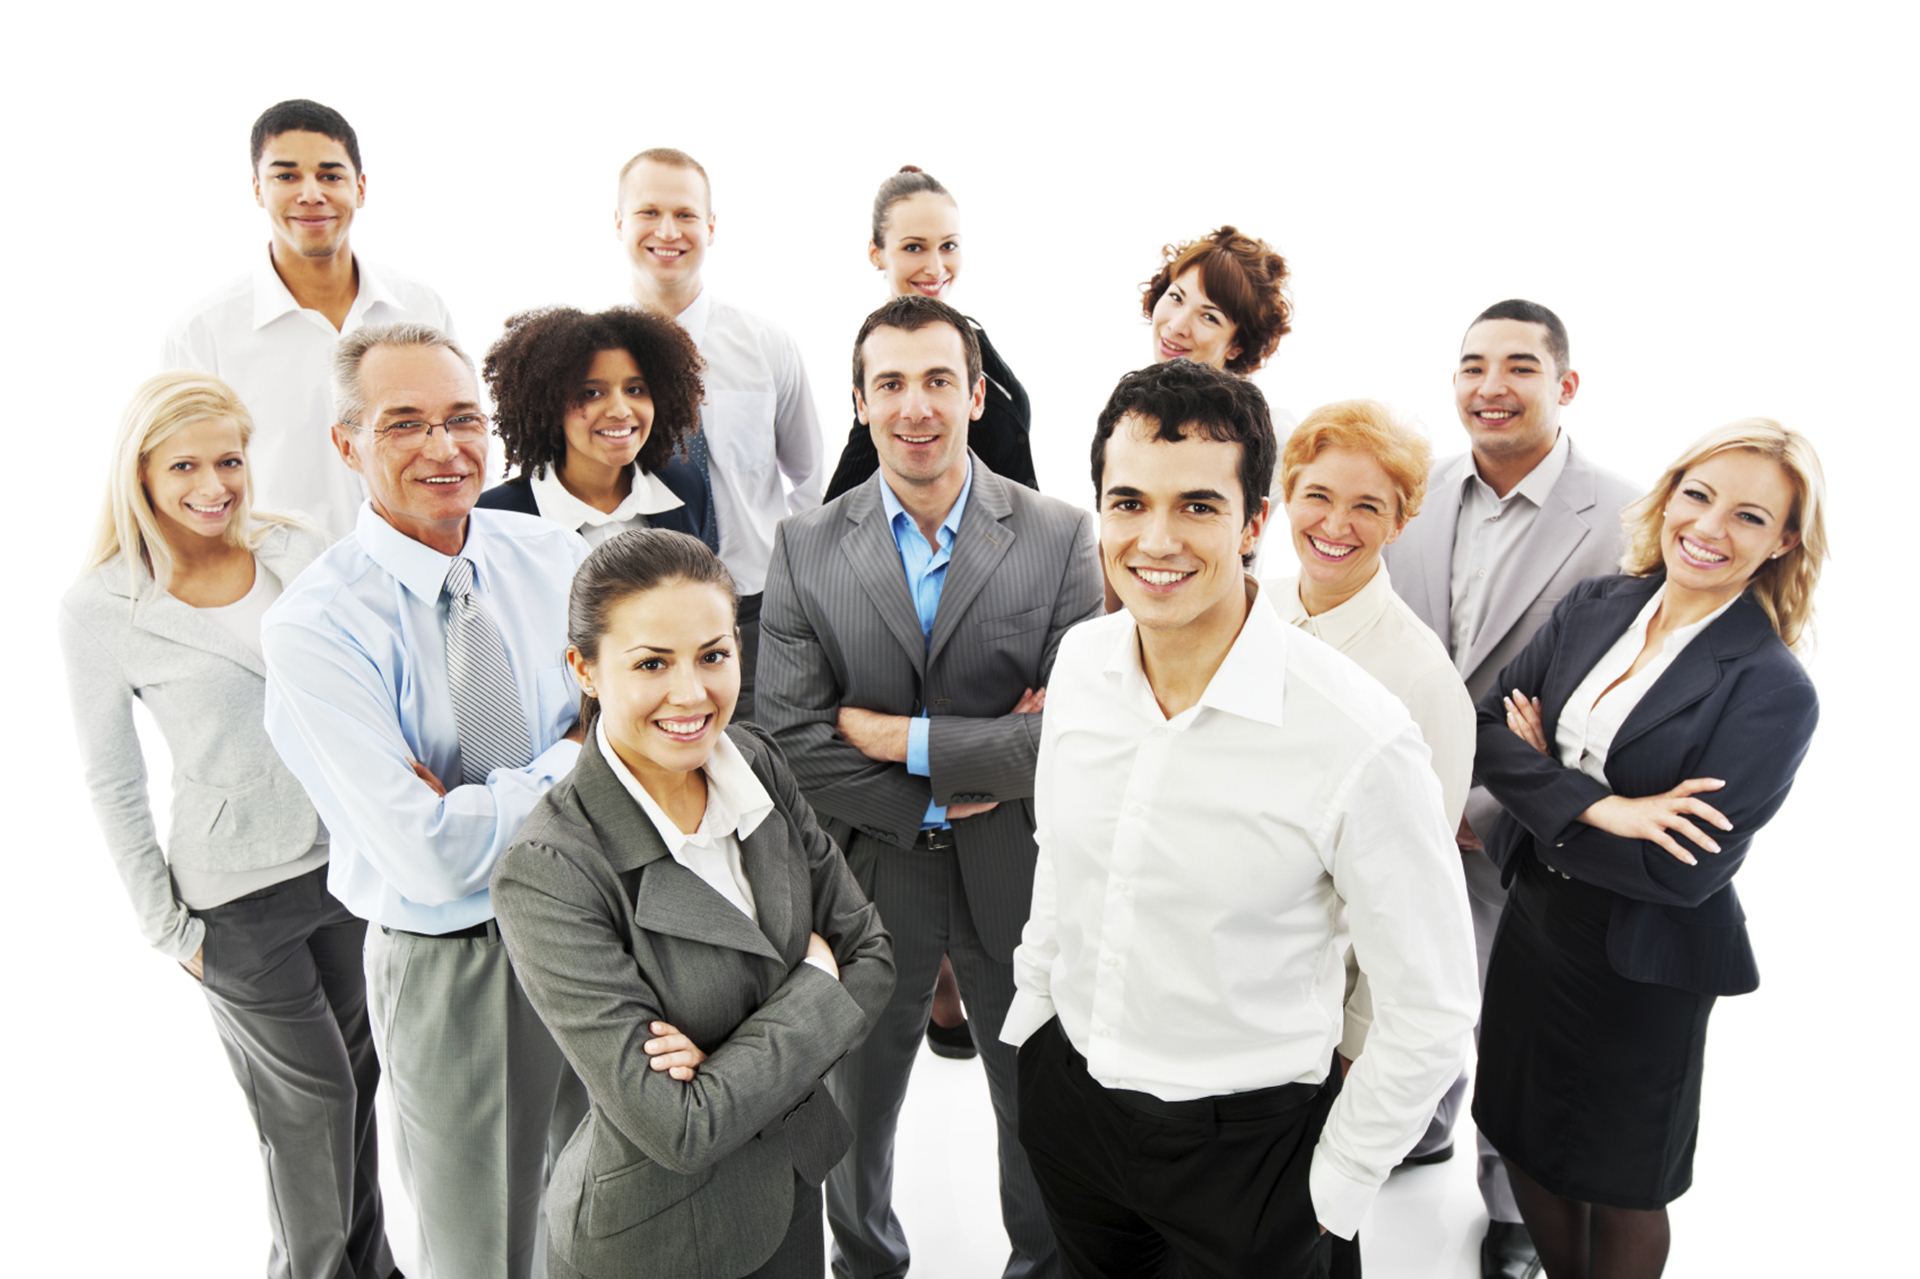 Group of a happy Business People standing together and looking at the camera.  Isolated on white background. [url=http://www.istockphoto.com/search/lightbox/9786622][img]http://dl.dropbox.com/u/40117171/business.jpg[/img][/url]